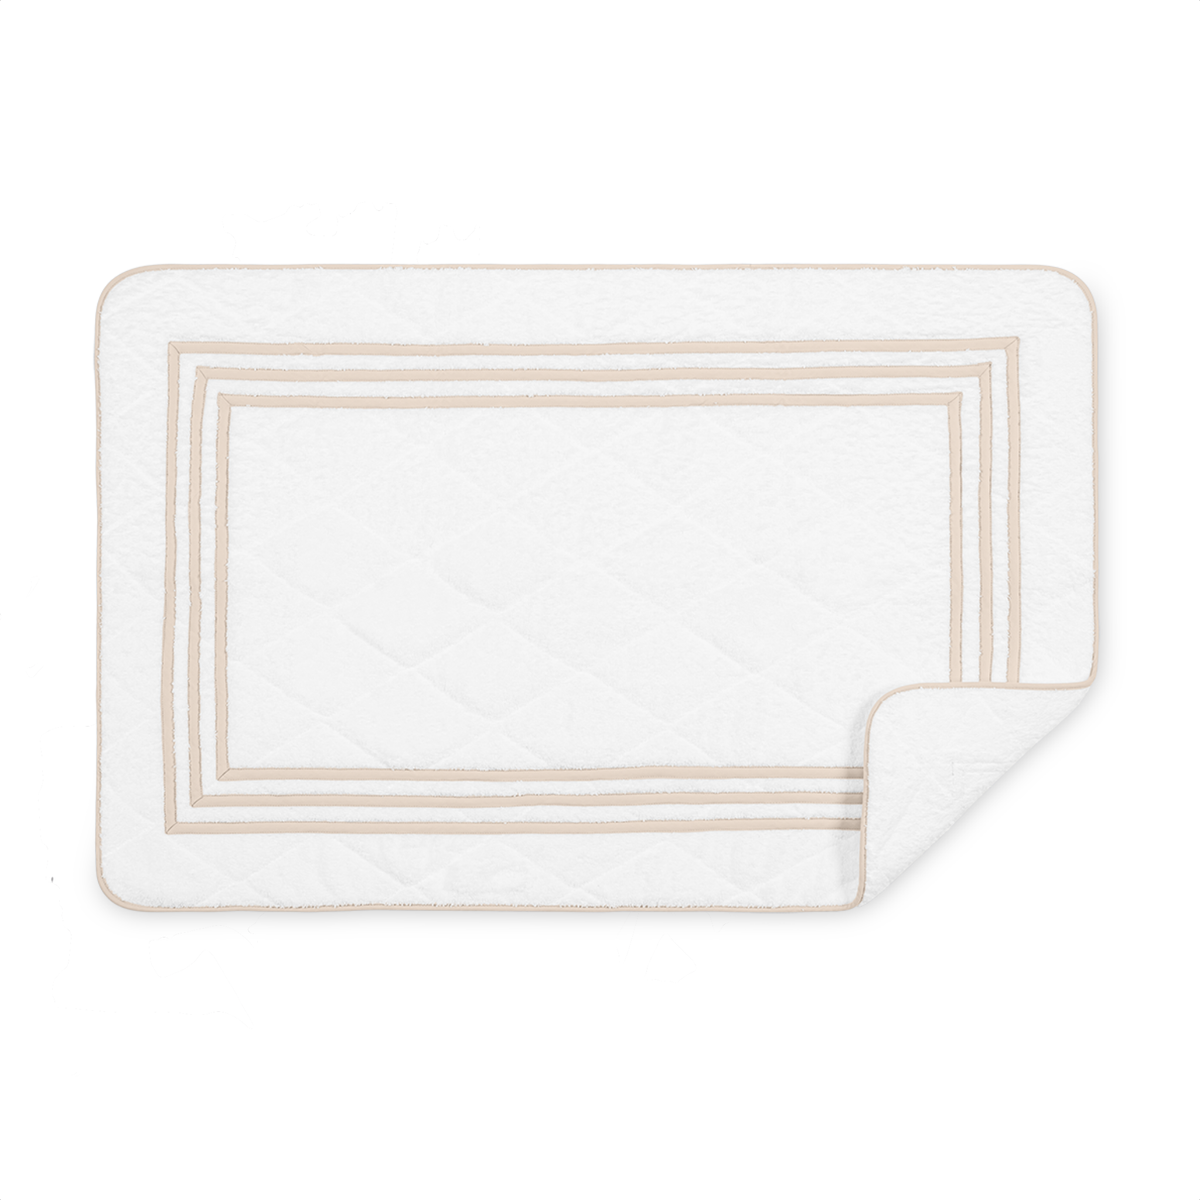 Matouk Newport Quilted Bath Tub Mat in Cotton Color